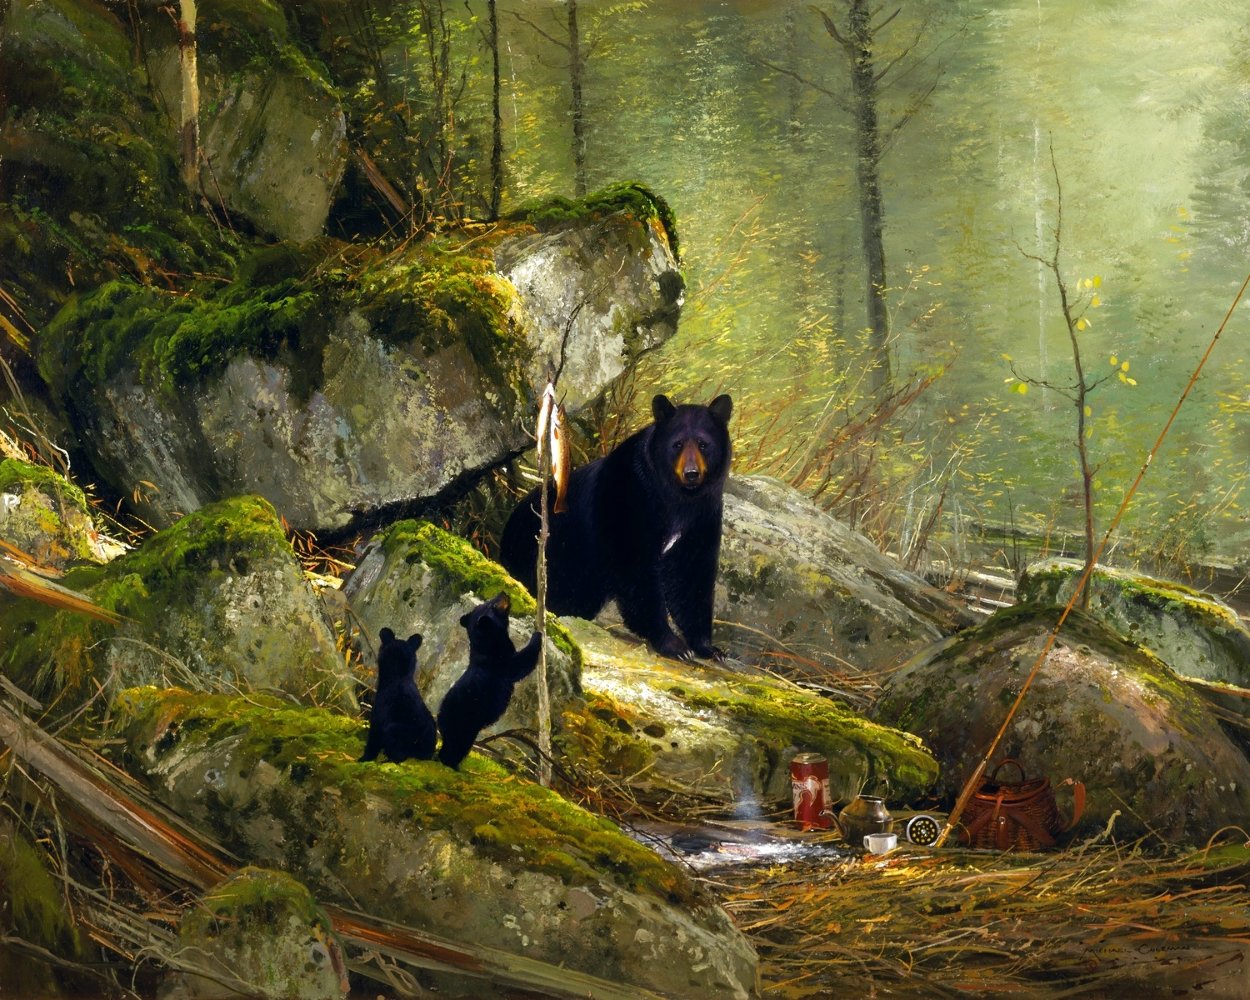 Visitors on the Sun River - Black Bears Limited Edition Print by Michael Coleman